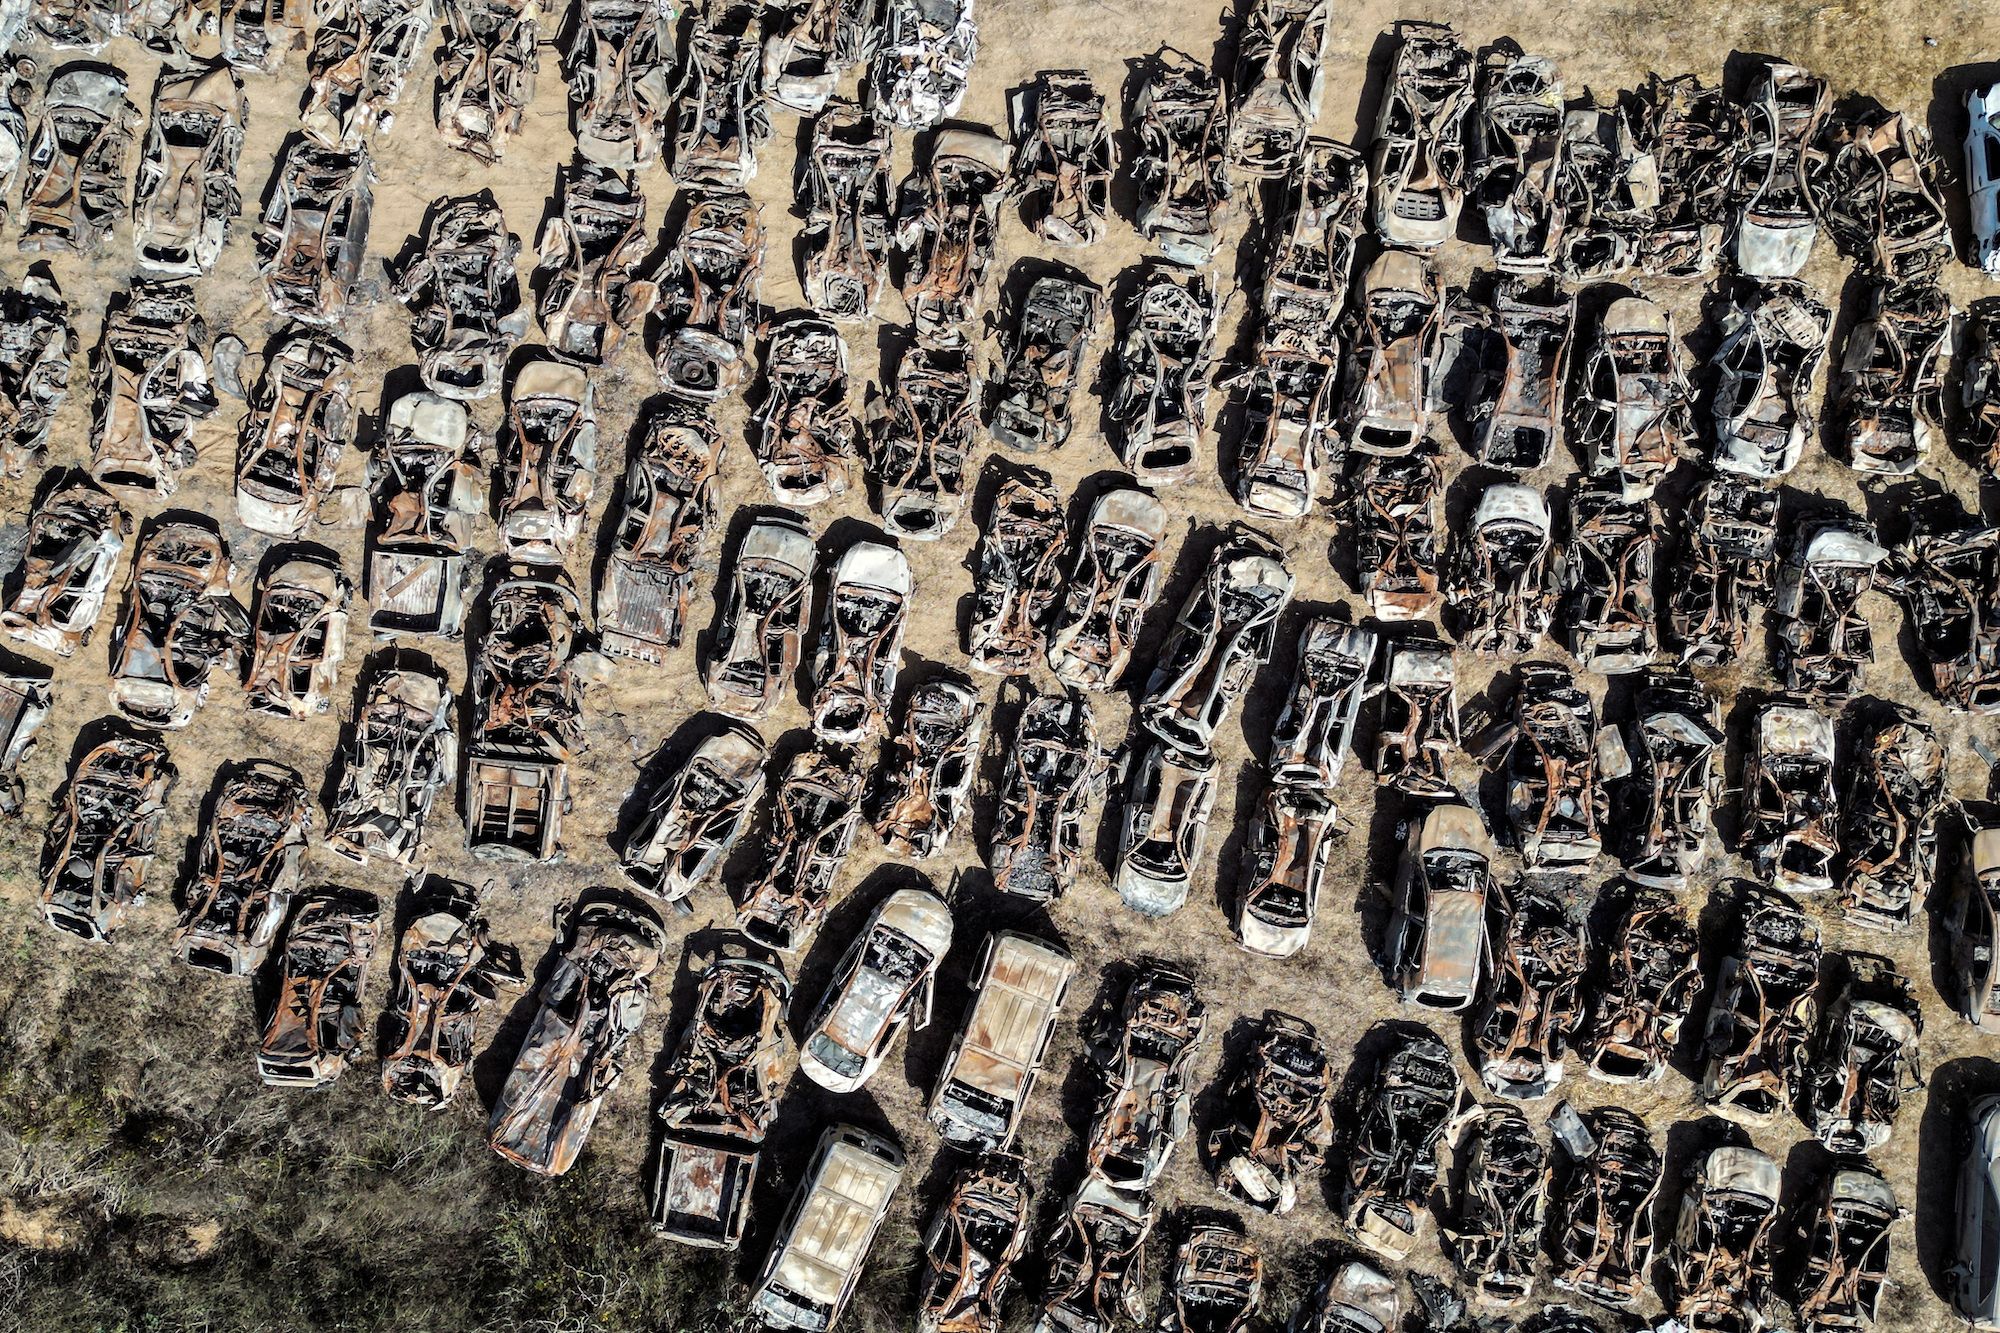 Vehicles destroyed by Hamas during the October 7 attack on Israel are seen collected in a field near the Israel's border with Gaza on October 30.